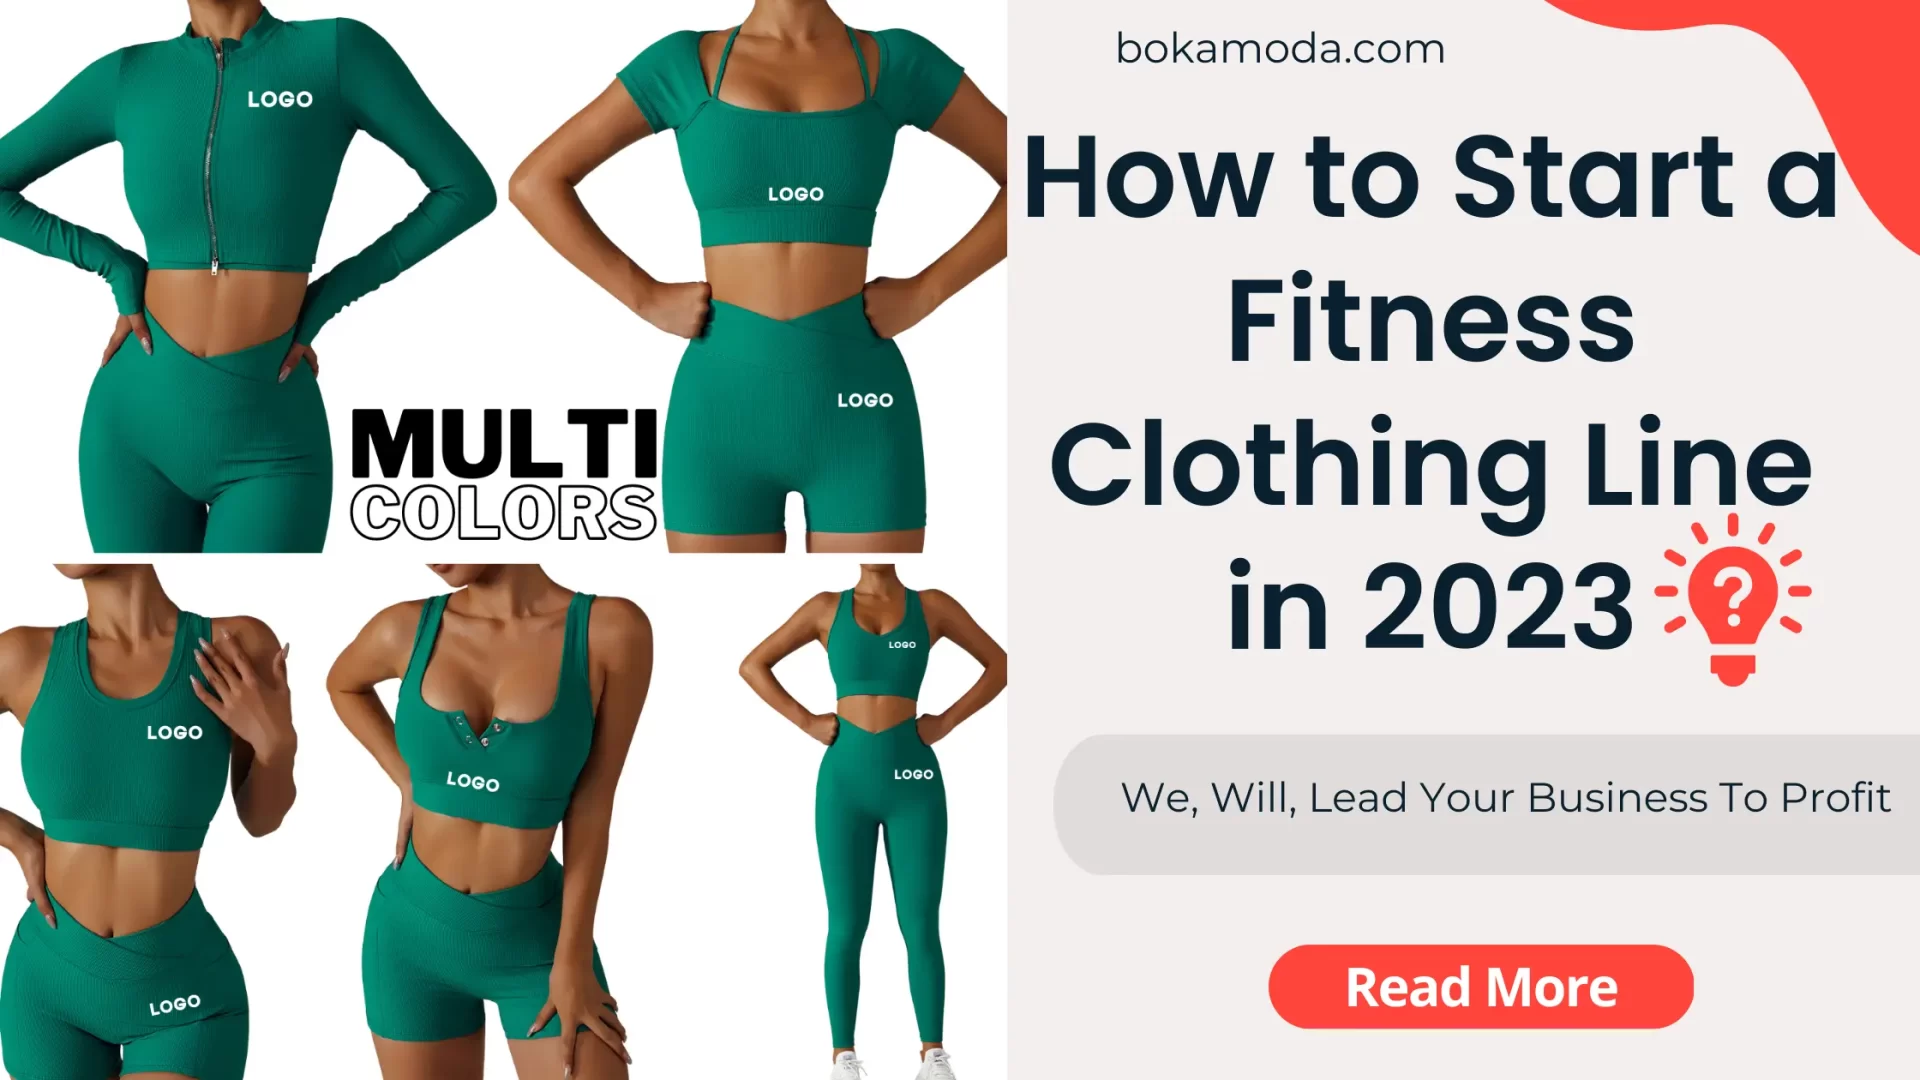 How to Start a Fitness Clothing Line in 2023